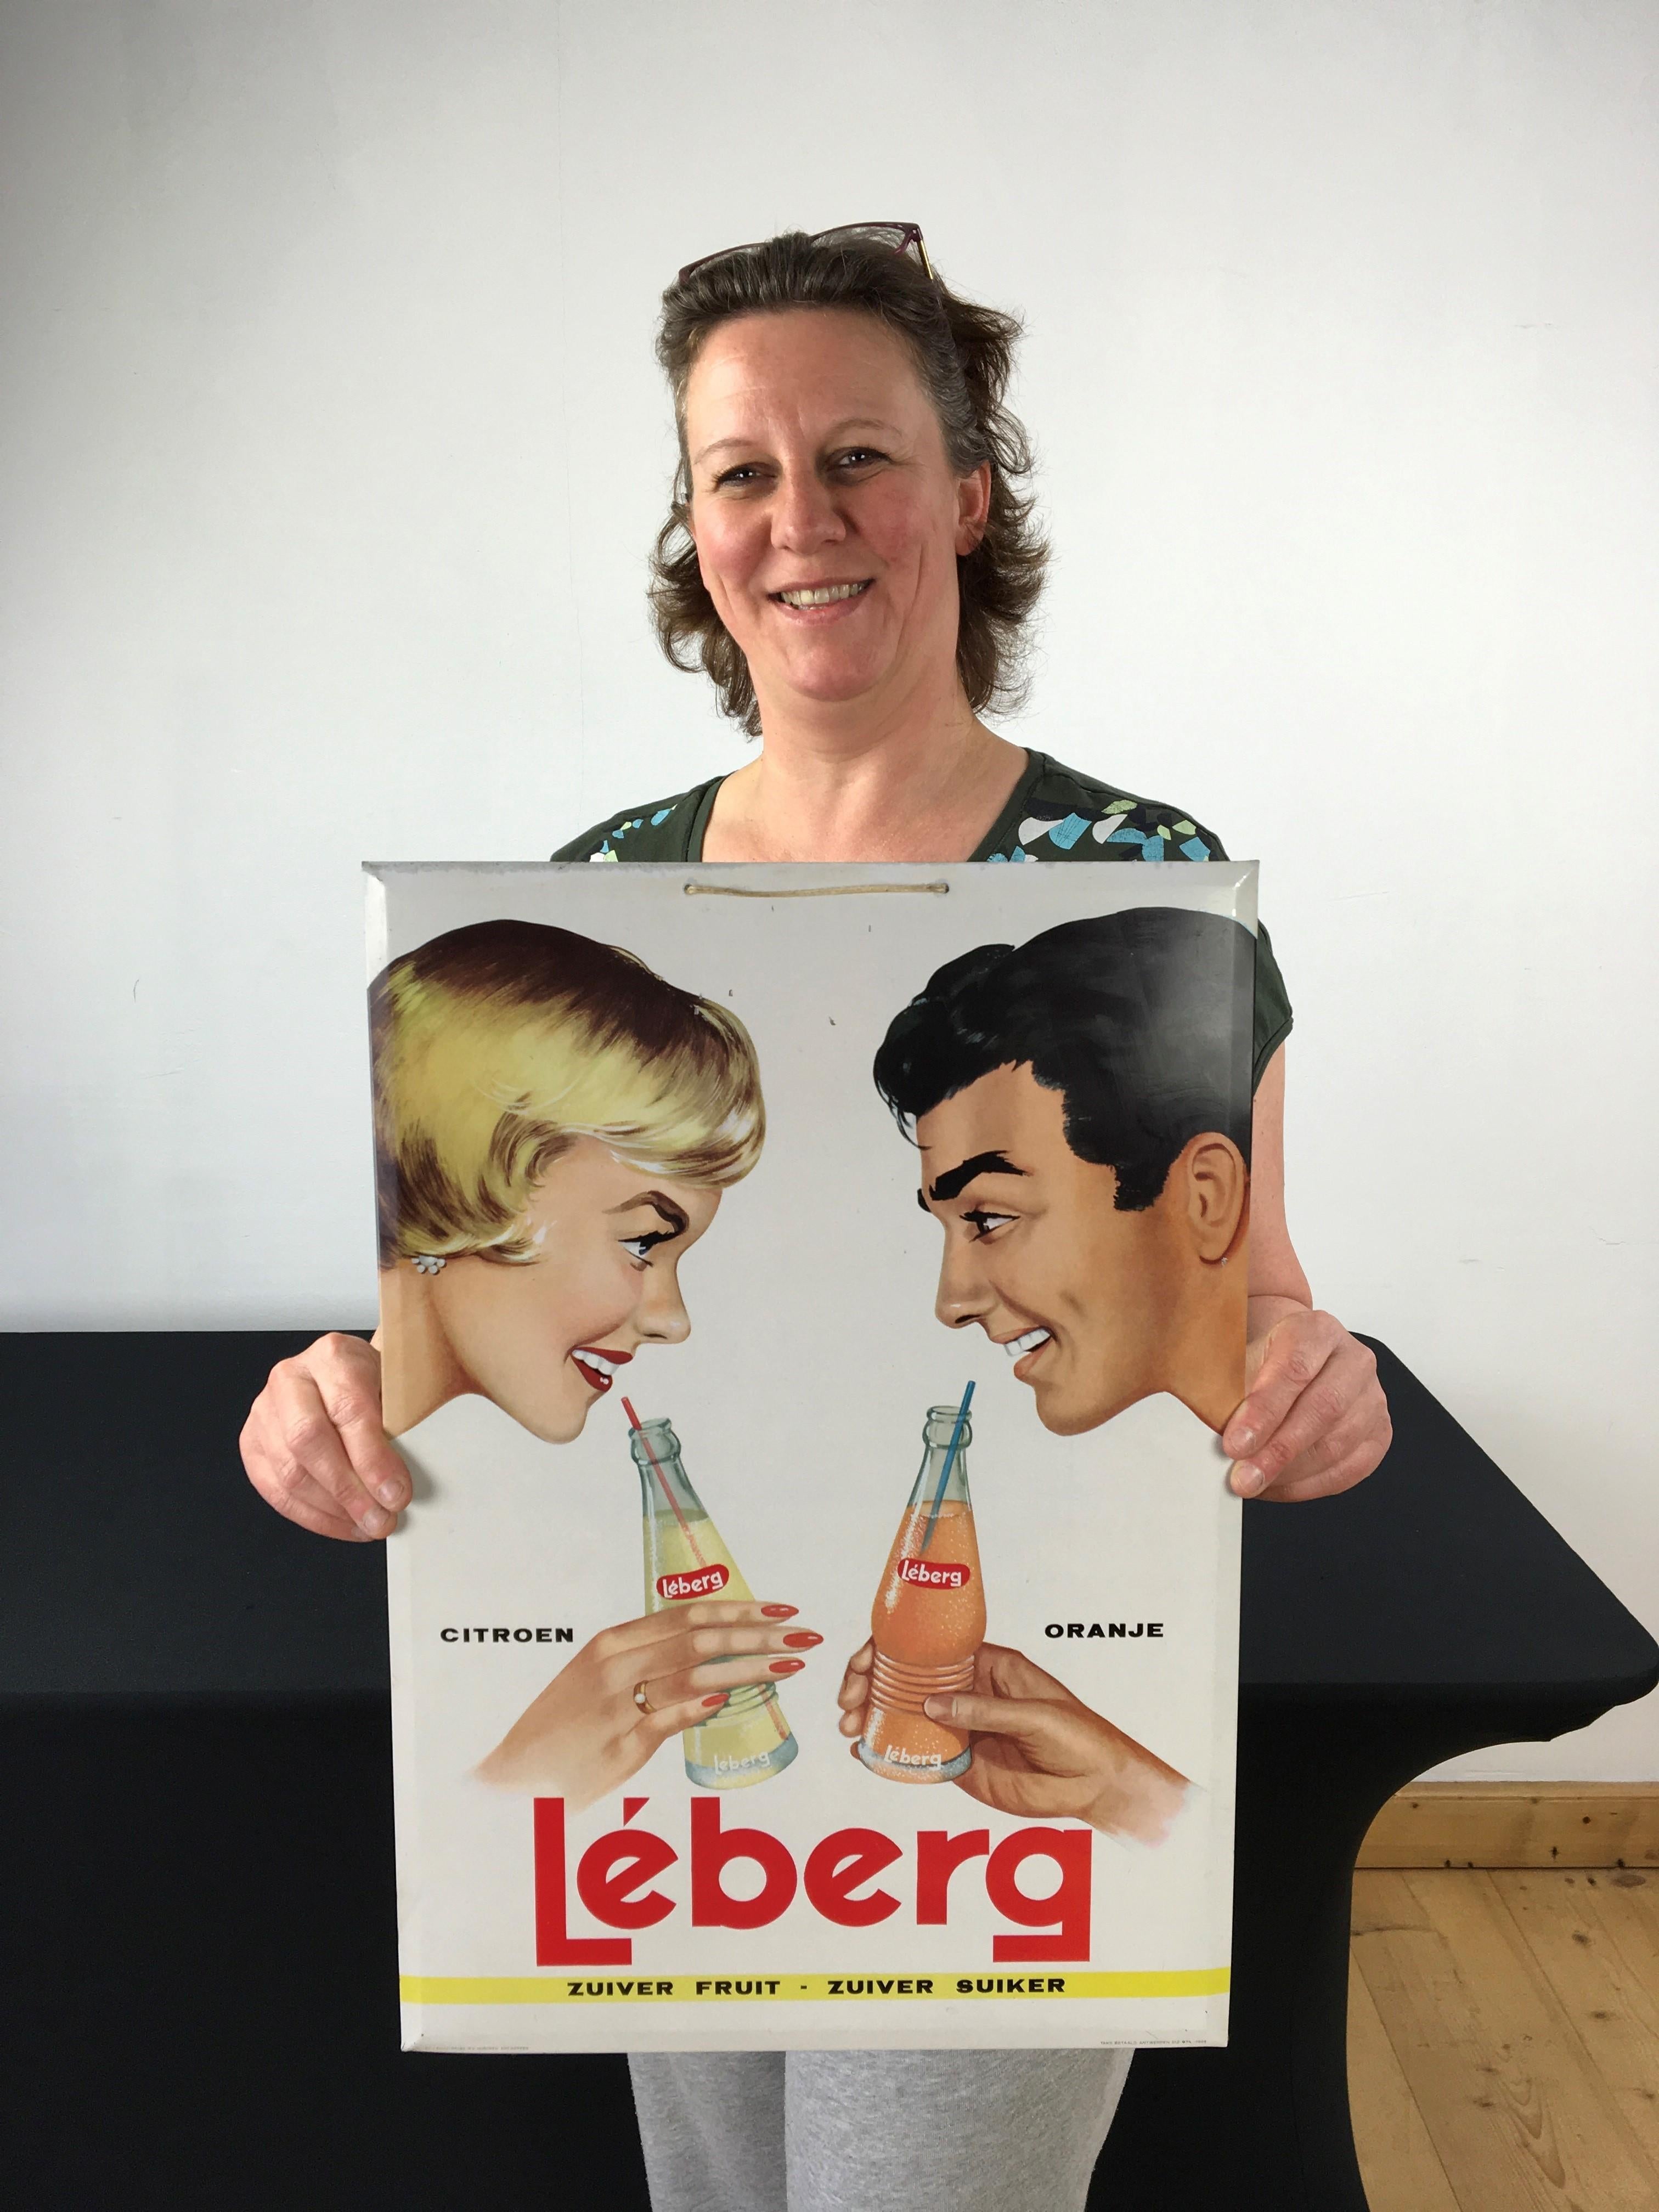 1960s tin sign for lemonade.
A romantic and cute metal advertising sign for Lemonade.
This old wall sign is dated 1961 and was made for the Belgian Company Leberg. Leberg started in 1933 with botteling water and lemonades.
A man and a woman are